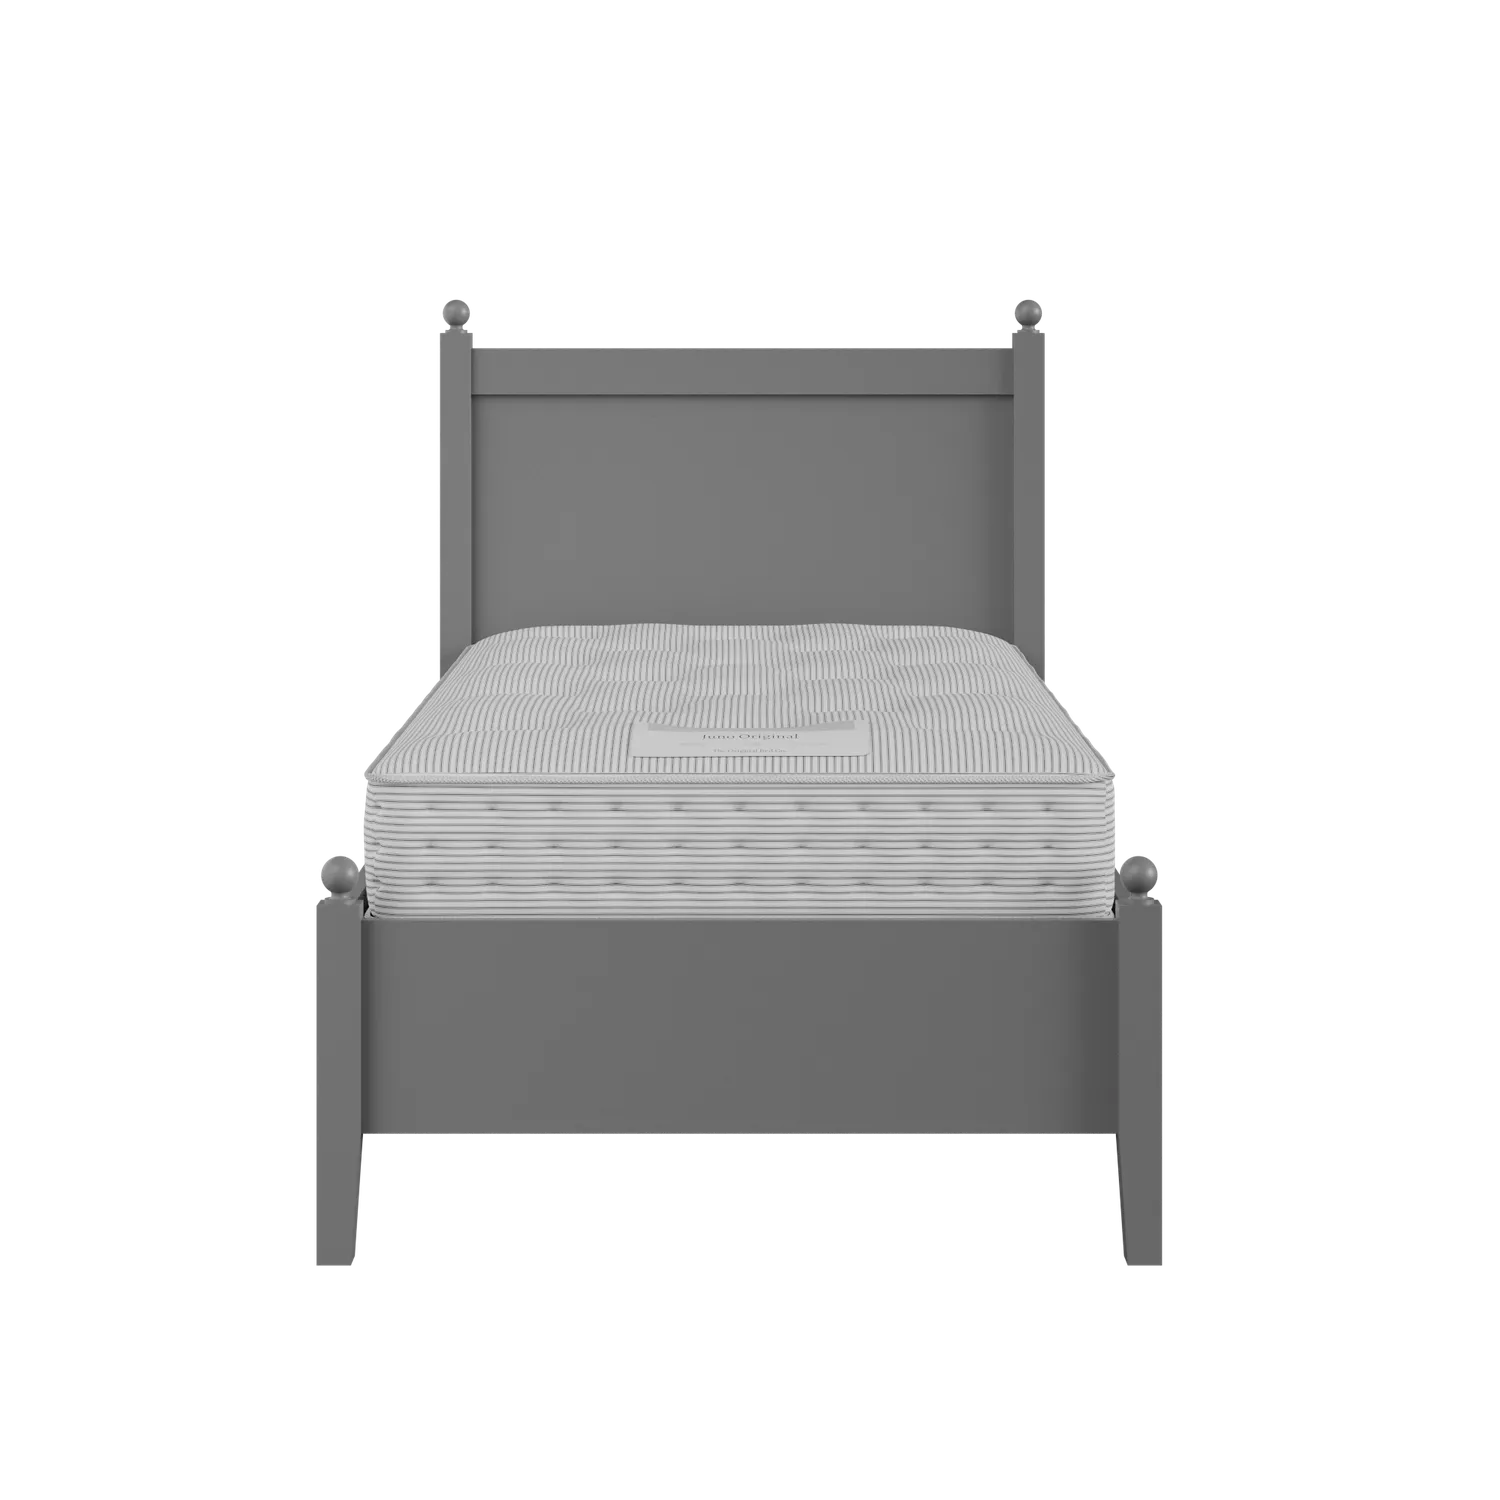 Marbella Low Footend Painted single painted wood bed in grey with Juno mattress